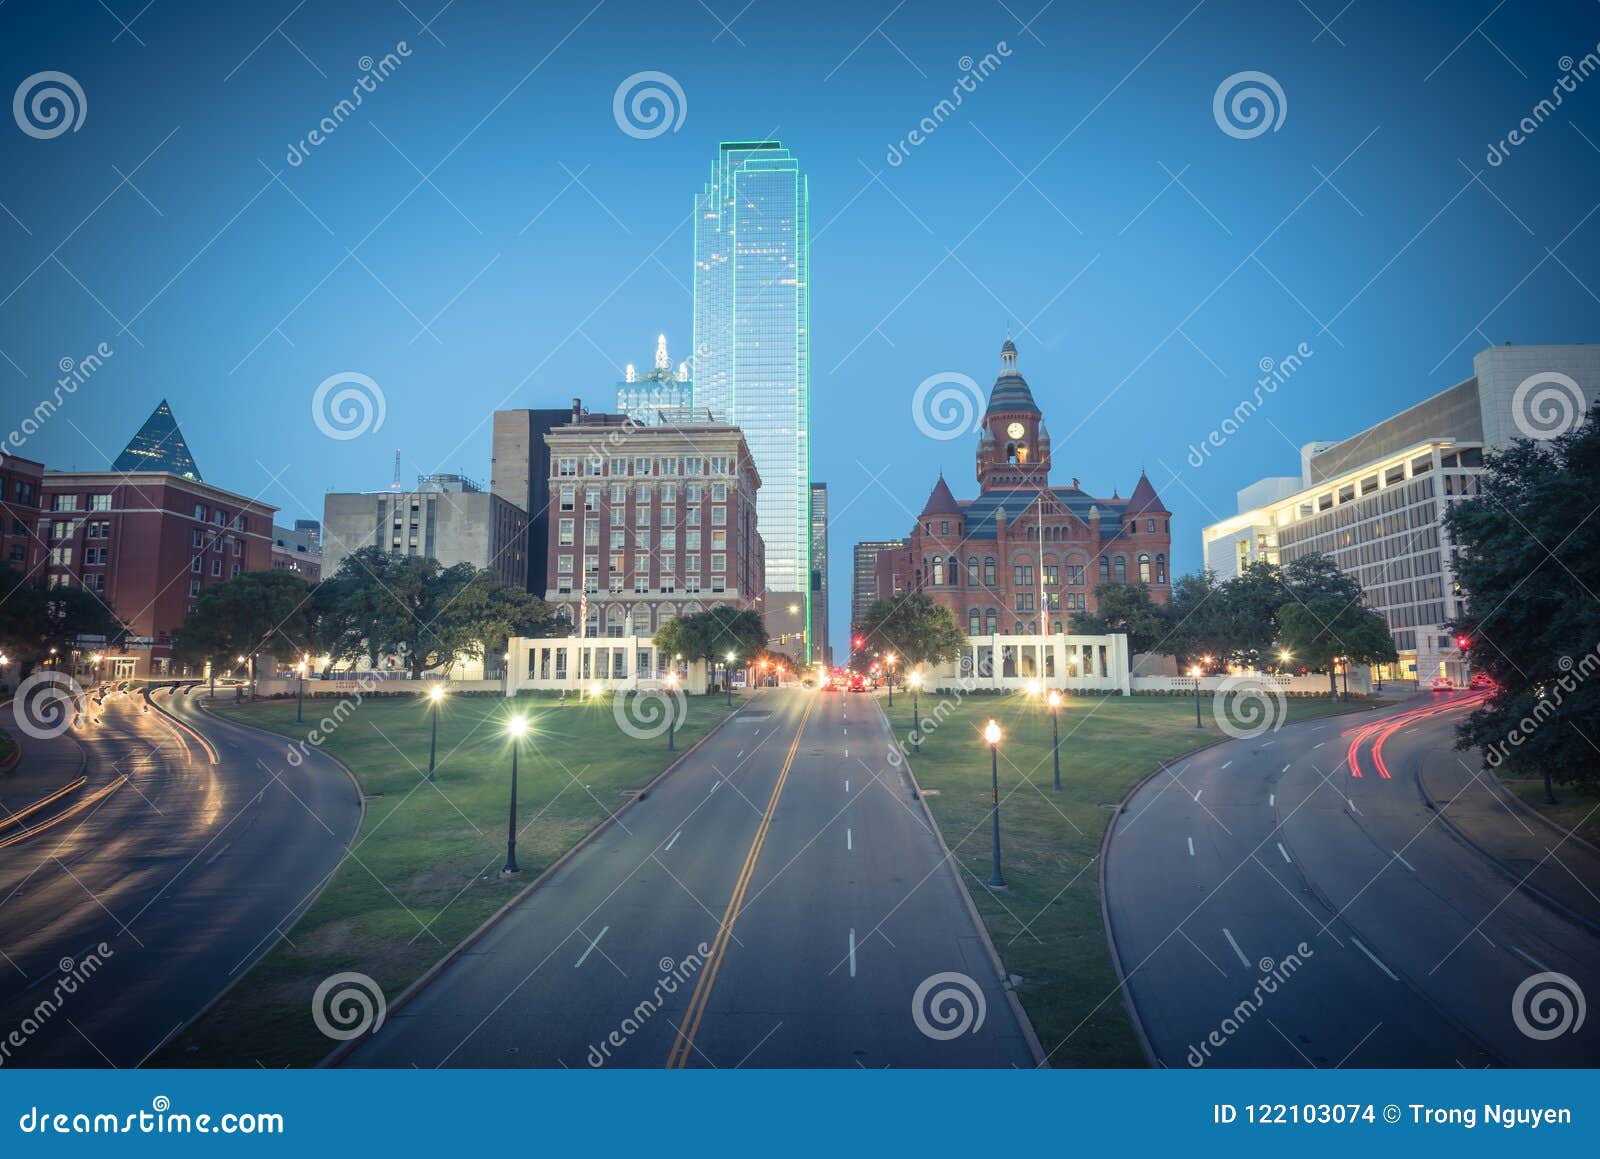 vintage skyline and light trail traffic over dealey plaza in dallas, texas